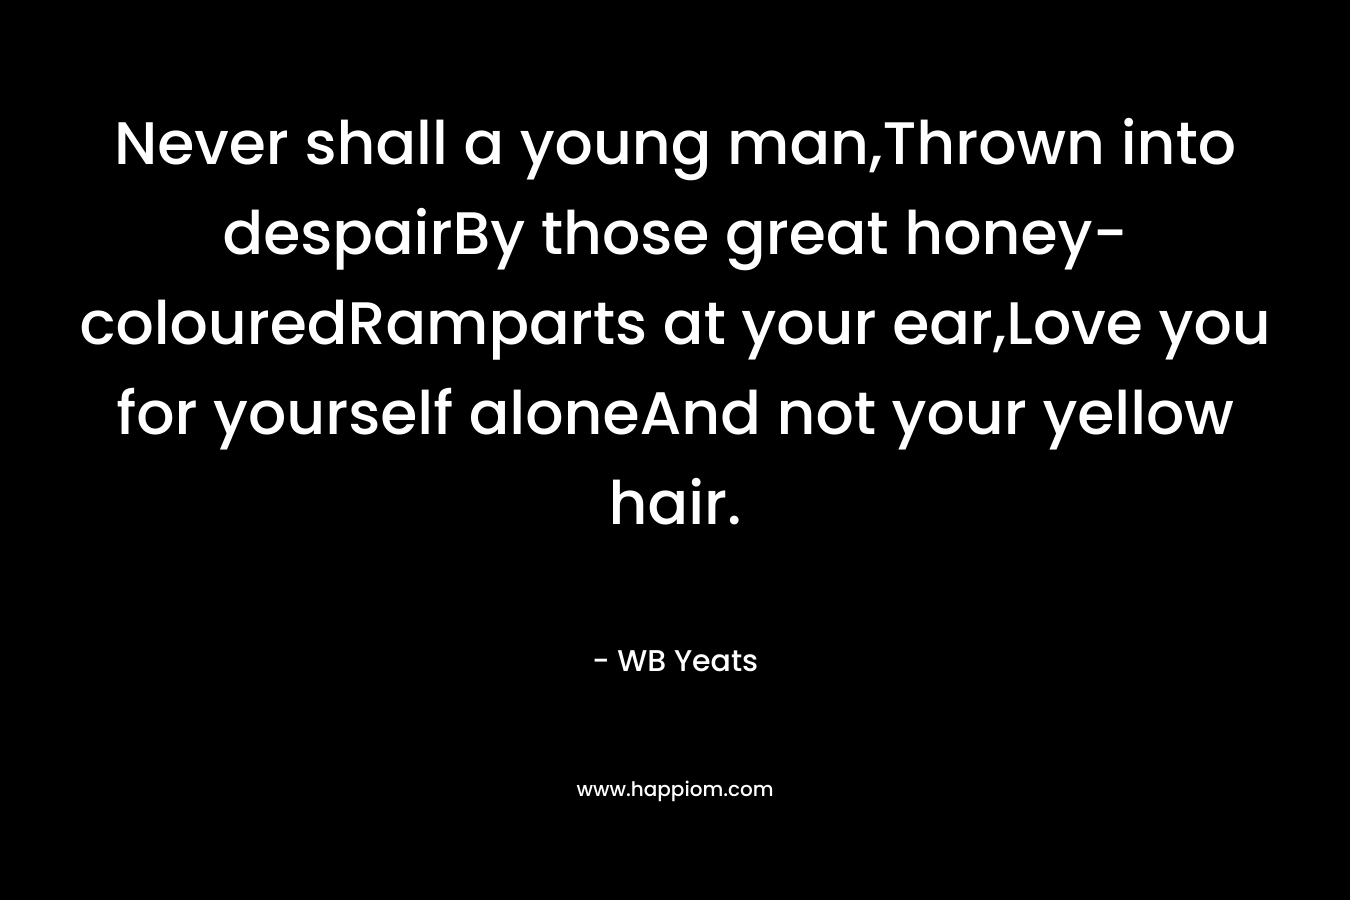 Never shall a young man,Thrown into despairBy those great honey-colouredRamparts at your ear,Love you for yourself aloneAnd not your yellow hair.